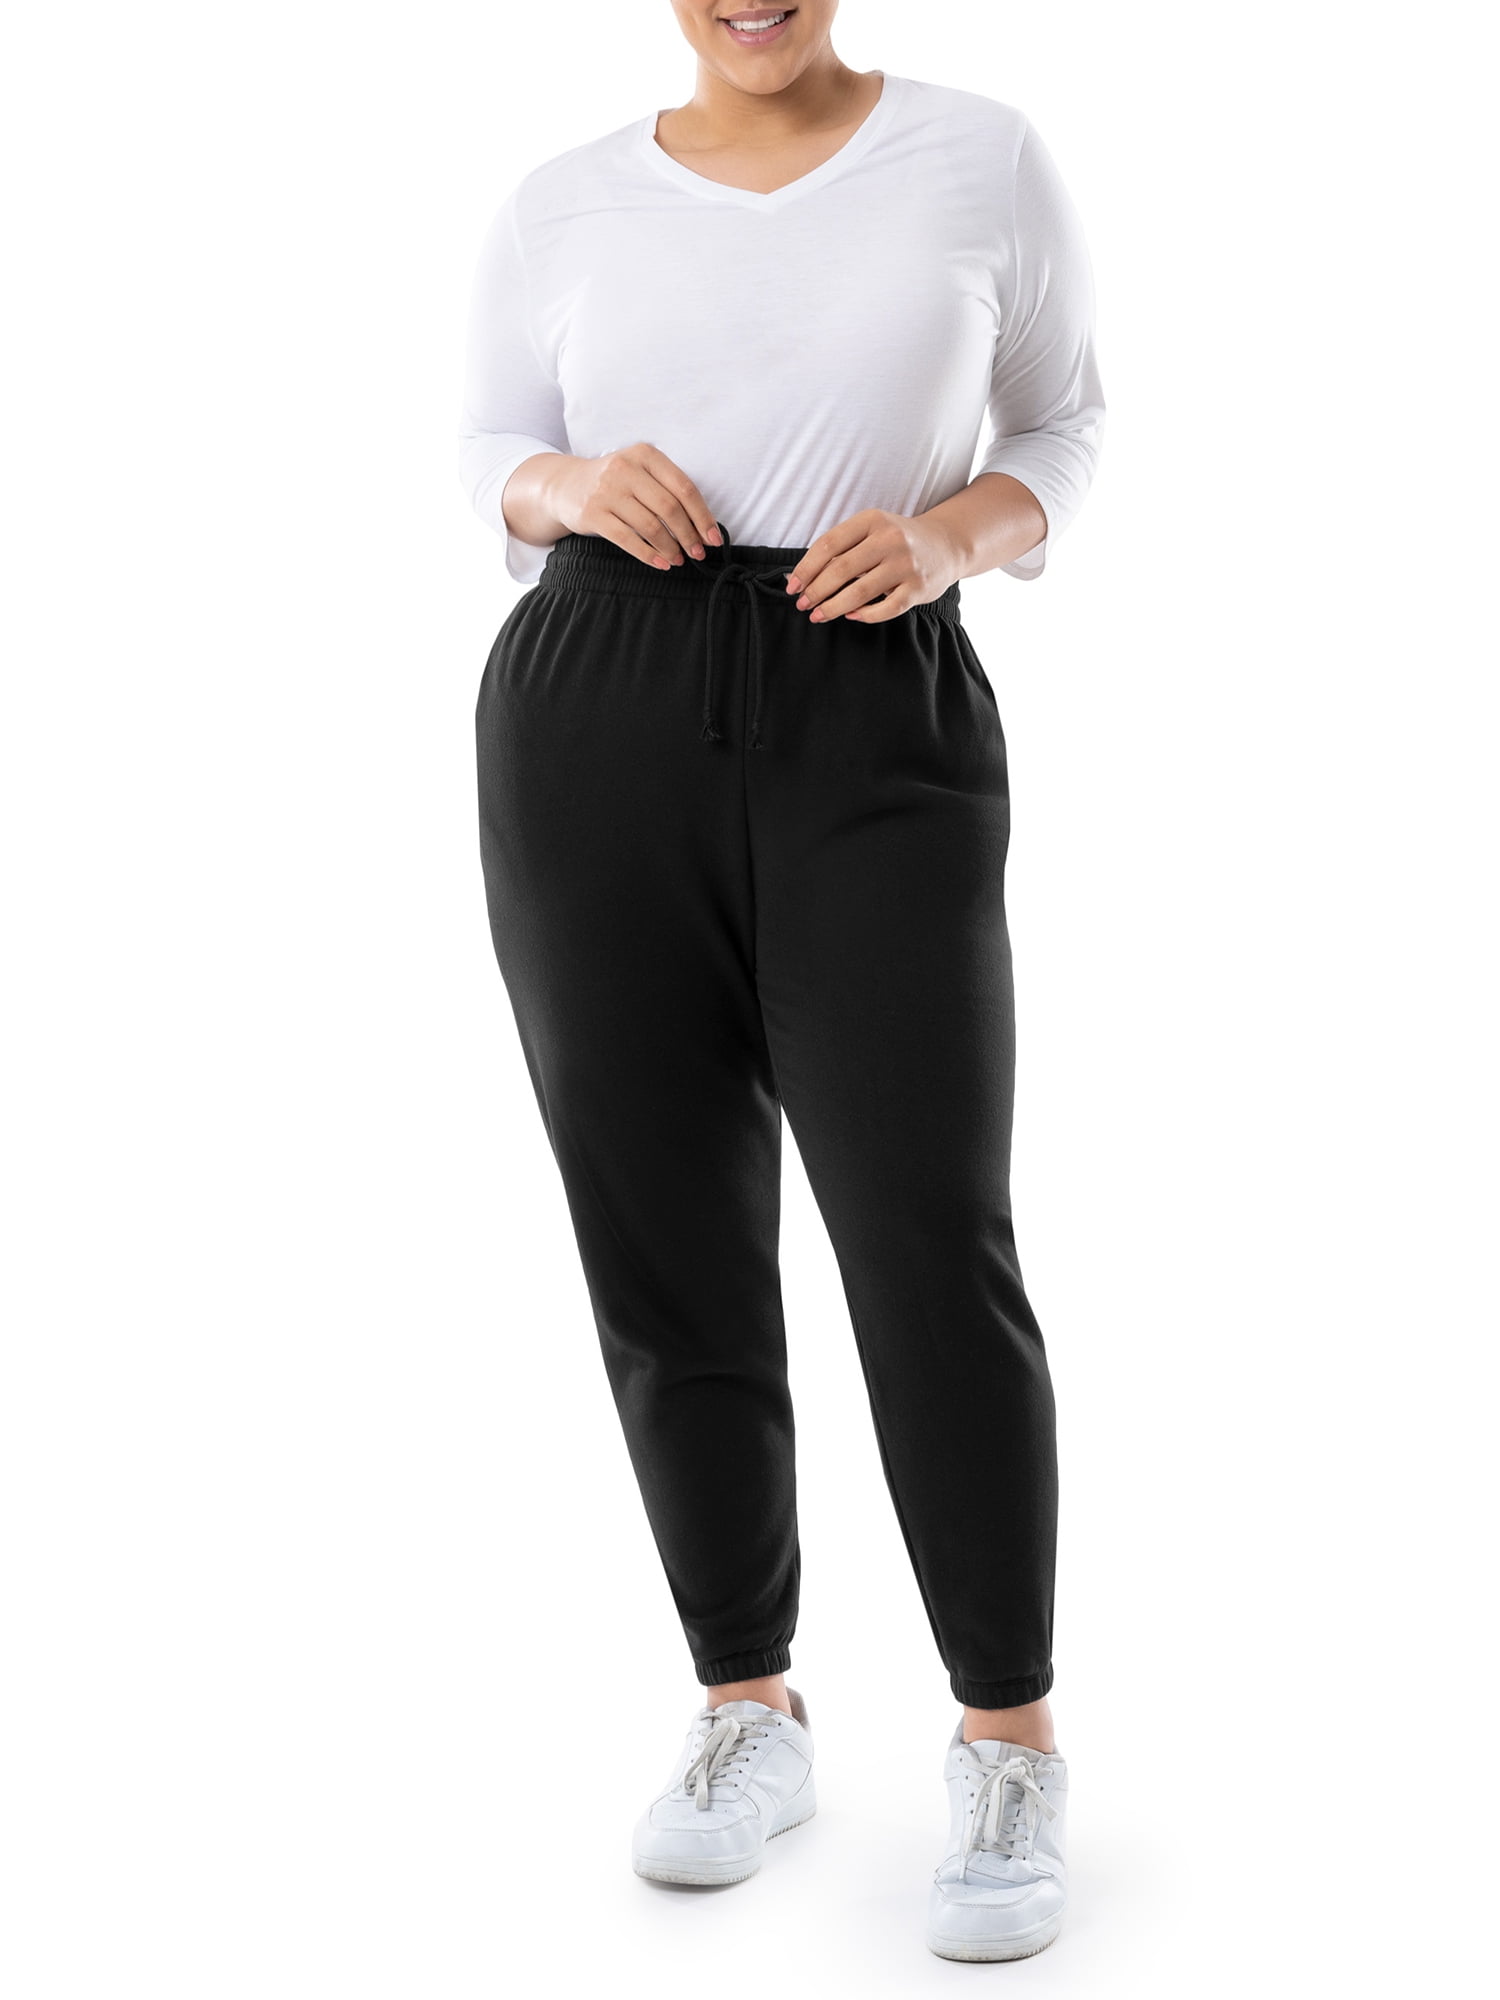 Terra & Sky Women's Plus Size French Terry Pull On Pants 